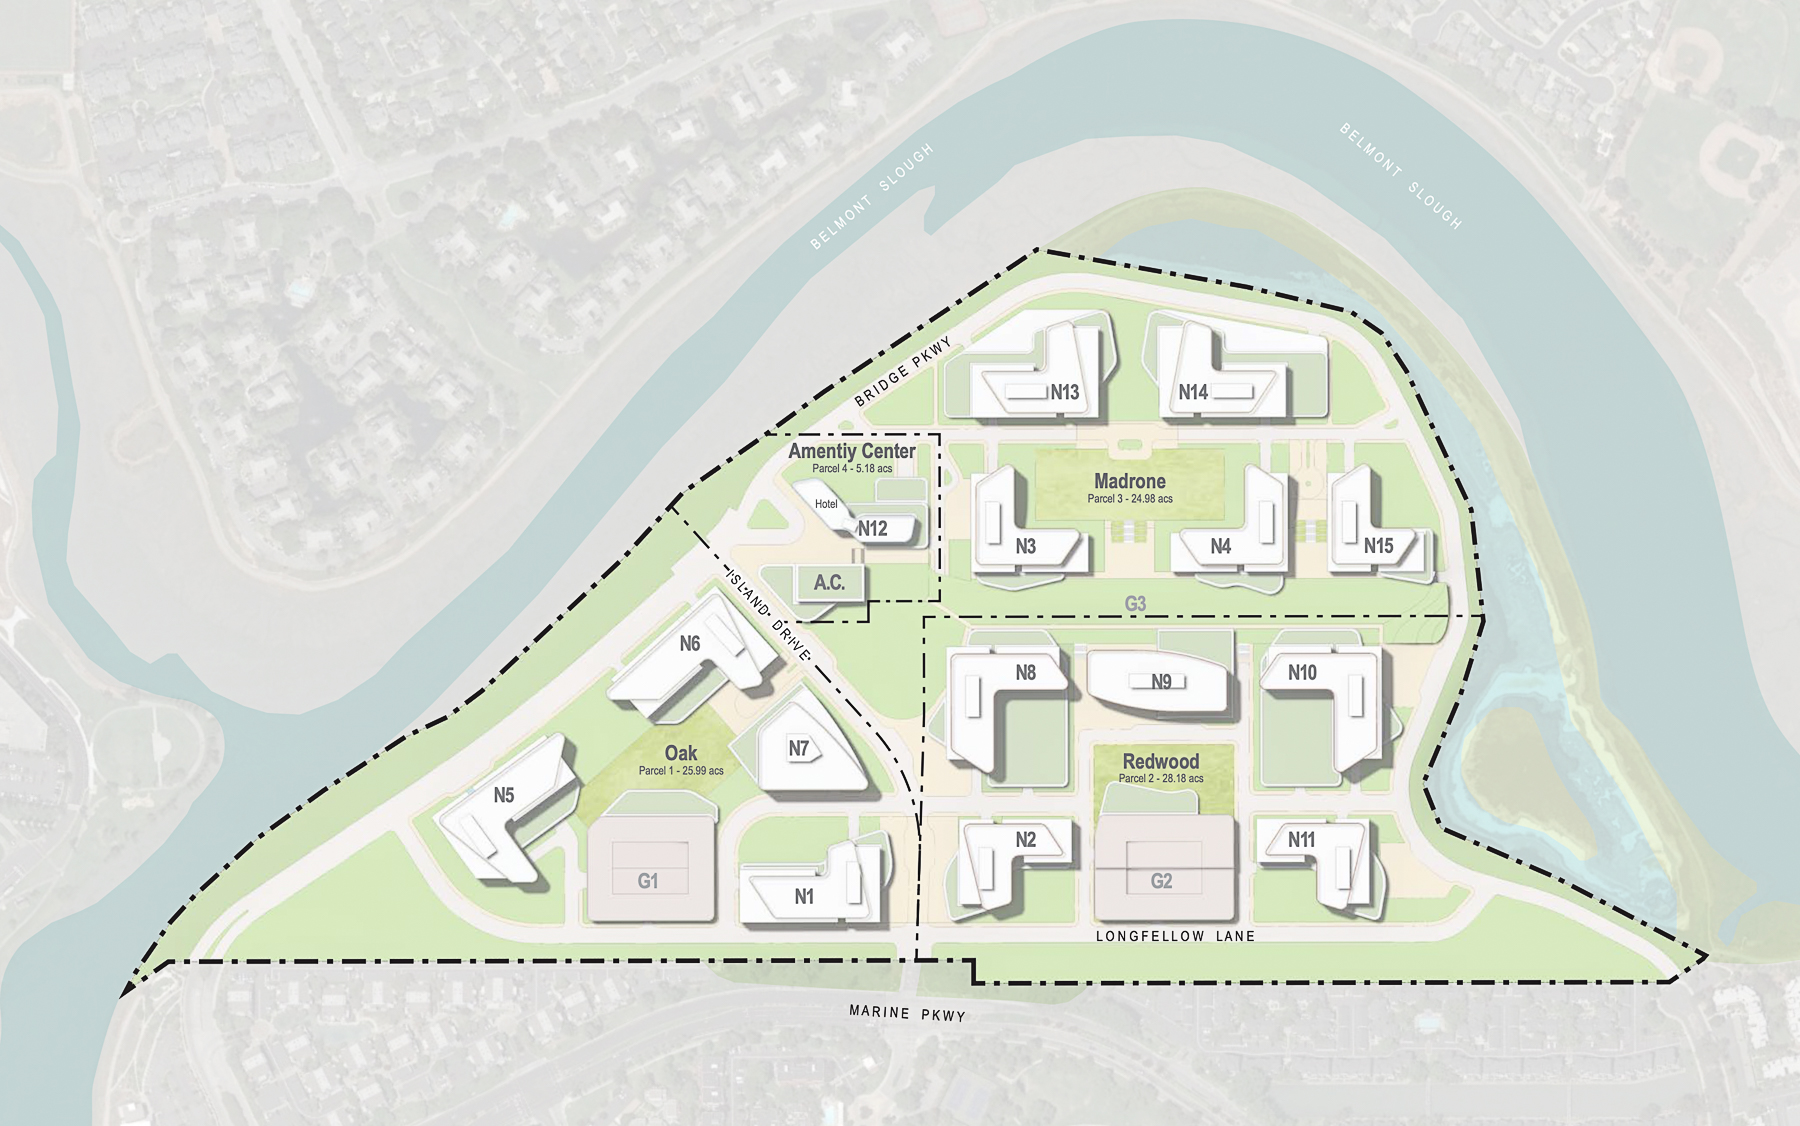 Bayshore Tech Park proposed parcel plan with districts labelled, design by HOK